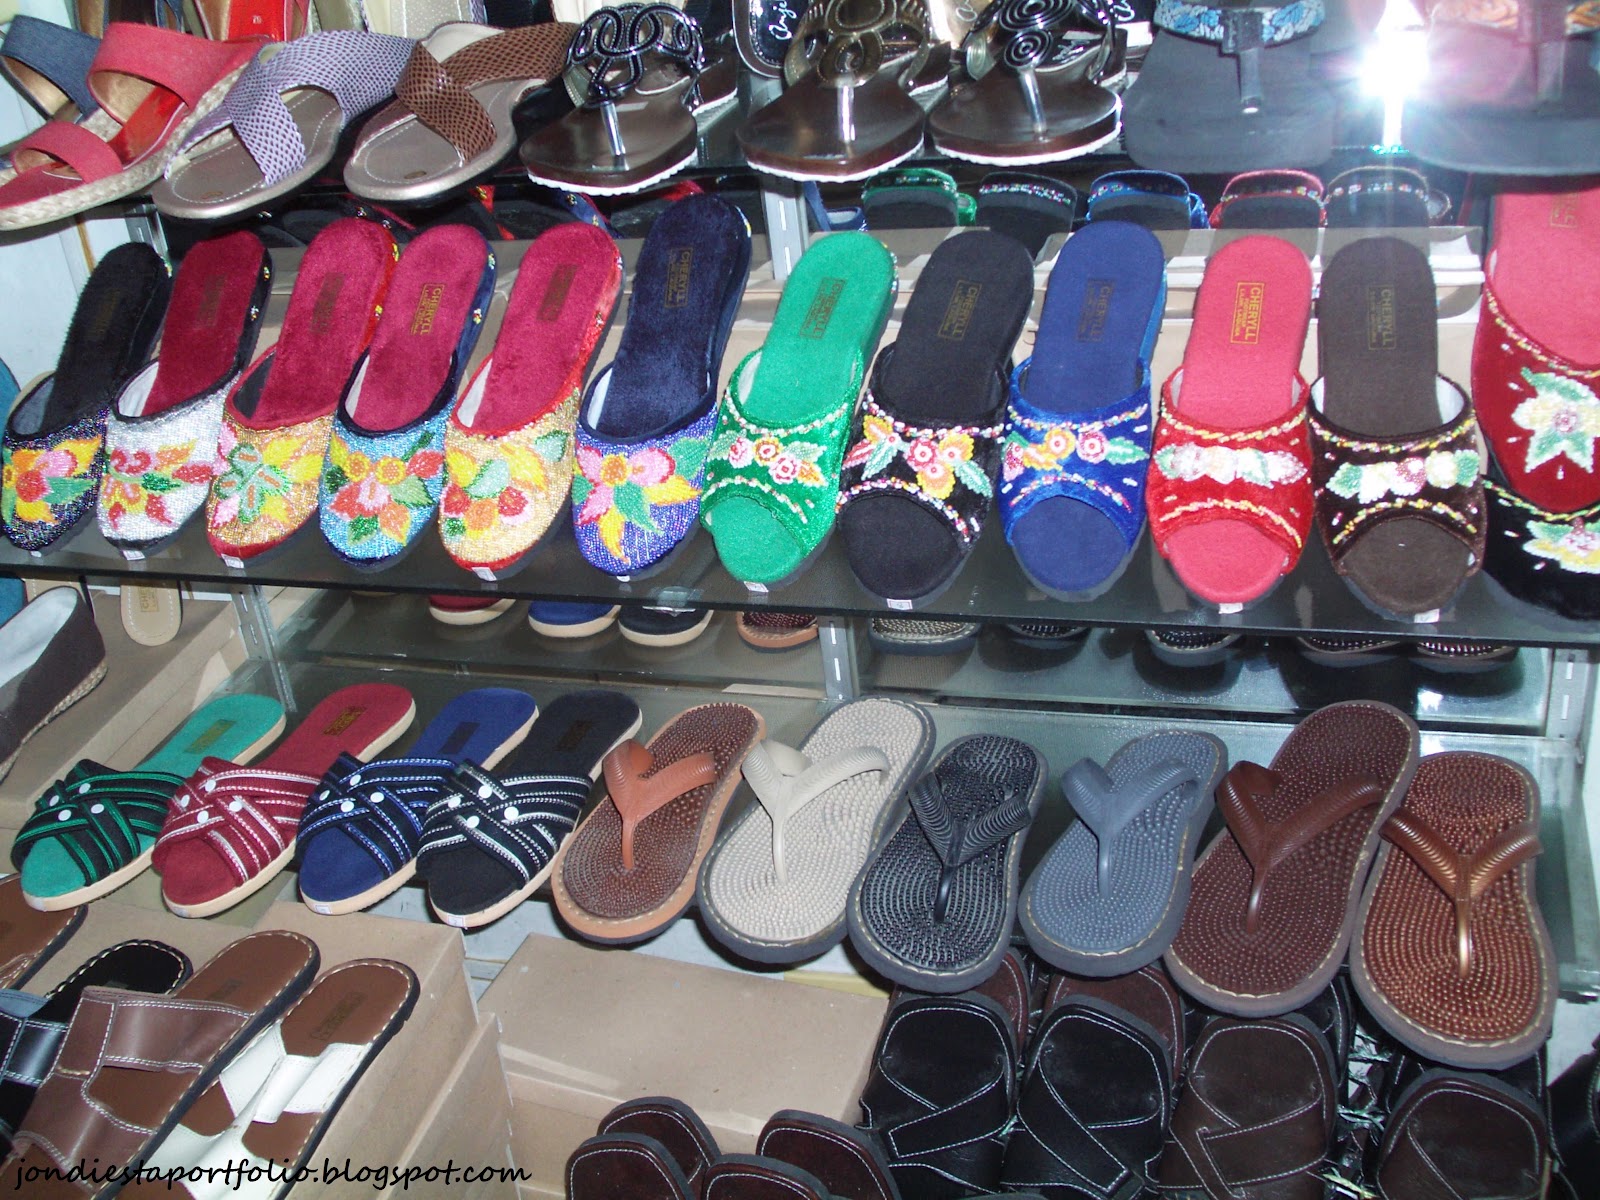 Travel and Paper Perspectives: Walking Tour in the Tsinelas Town of Laguna